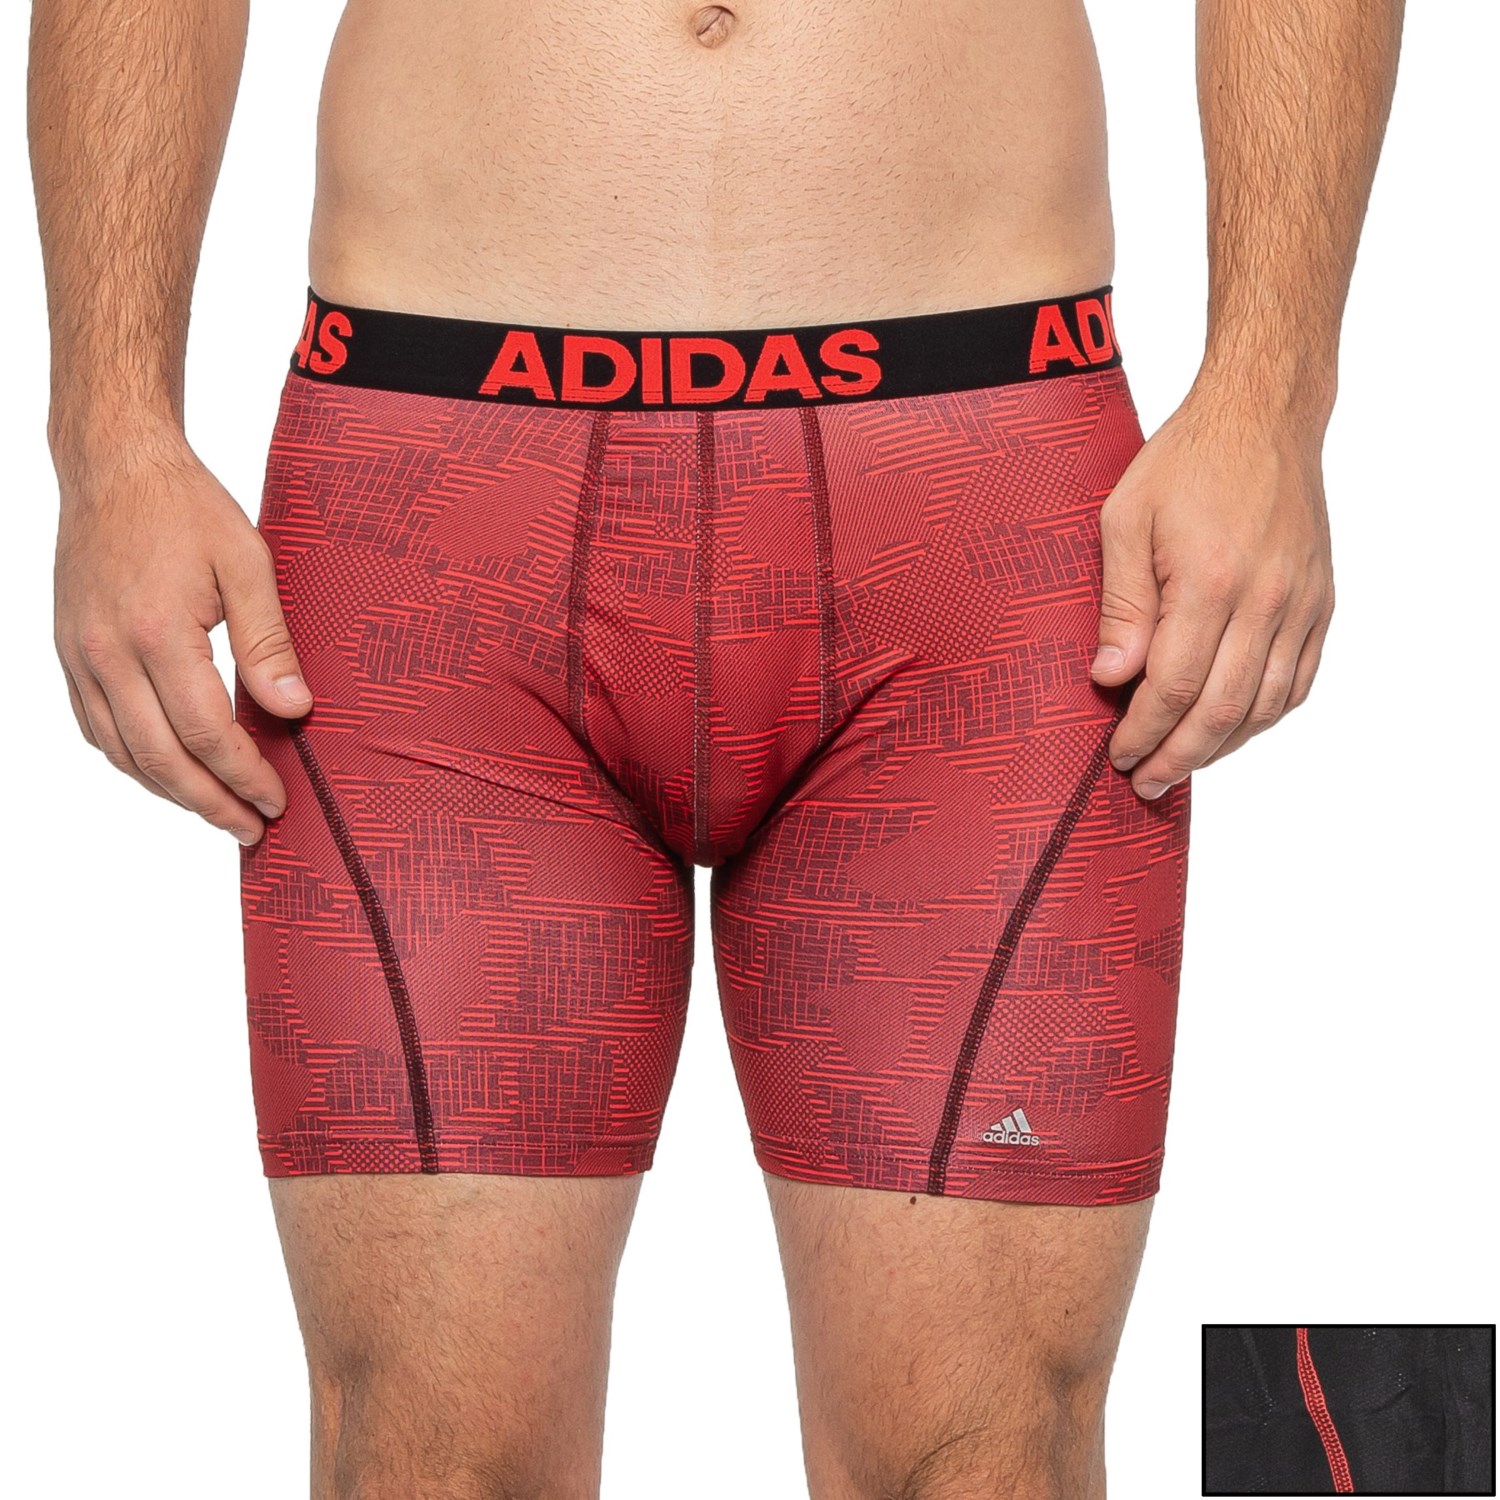 adidas men's climacool 7 midway briefs uk